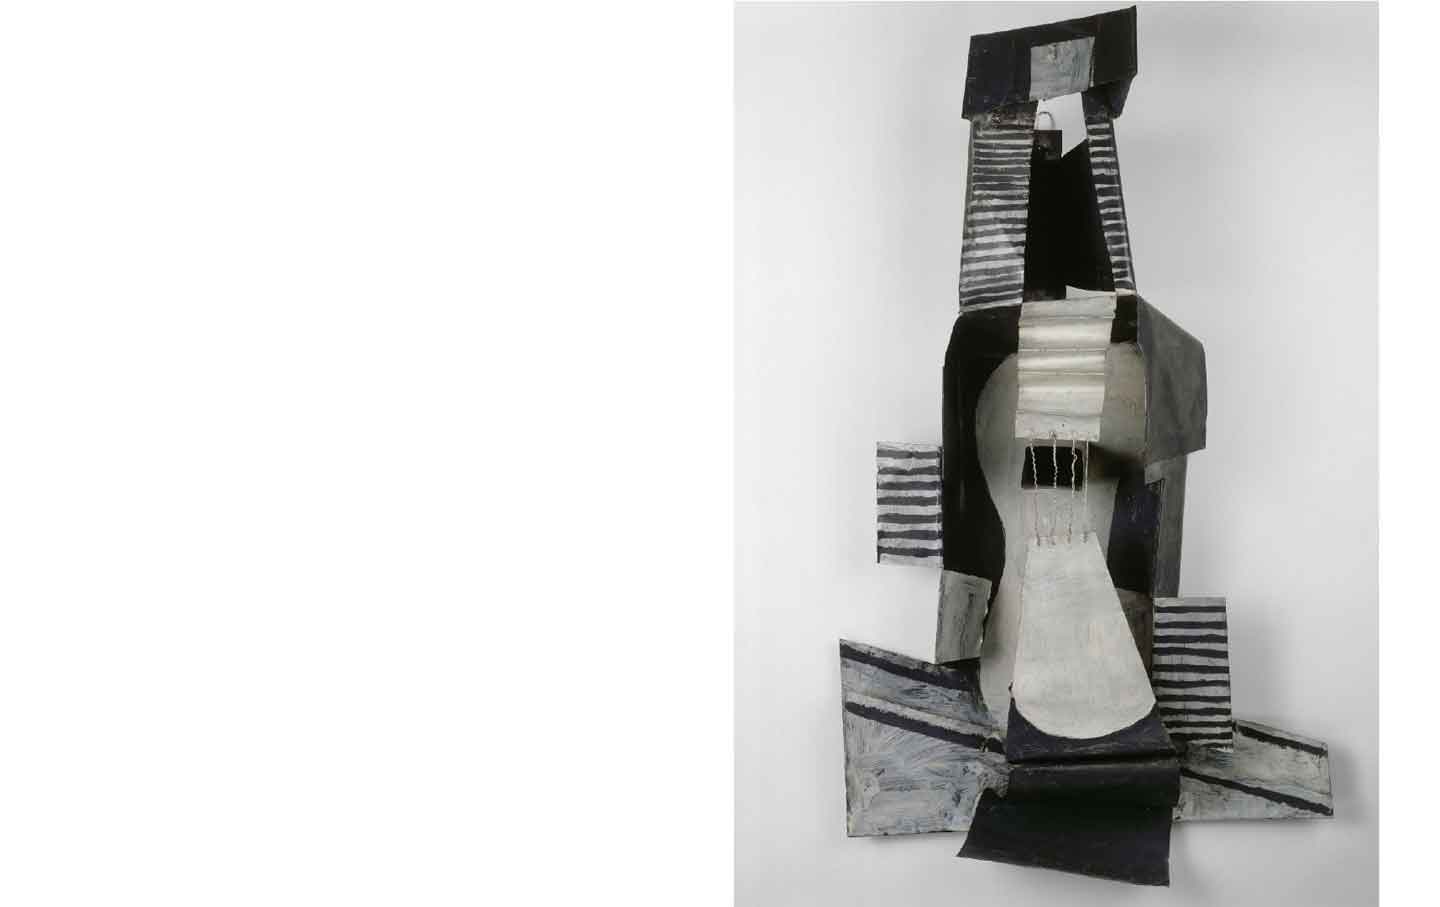 Pablo Picasso, Guitar (1924), © Estate of Pablo Picasso / Artists Rights Society, New York